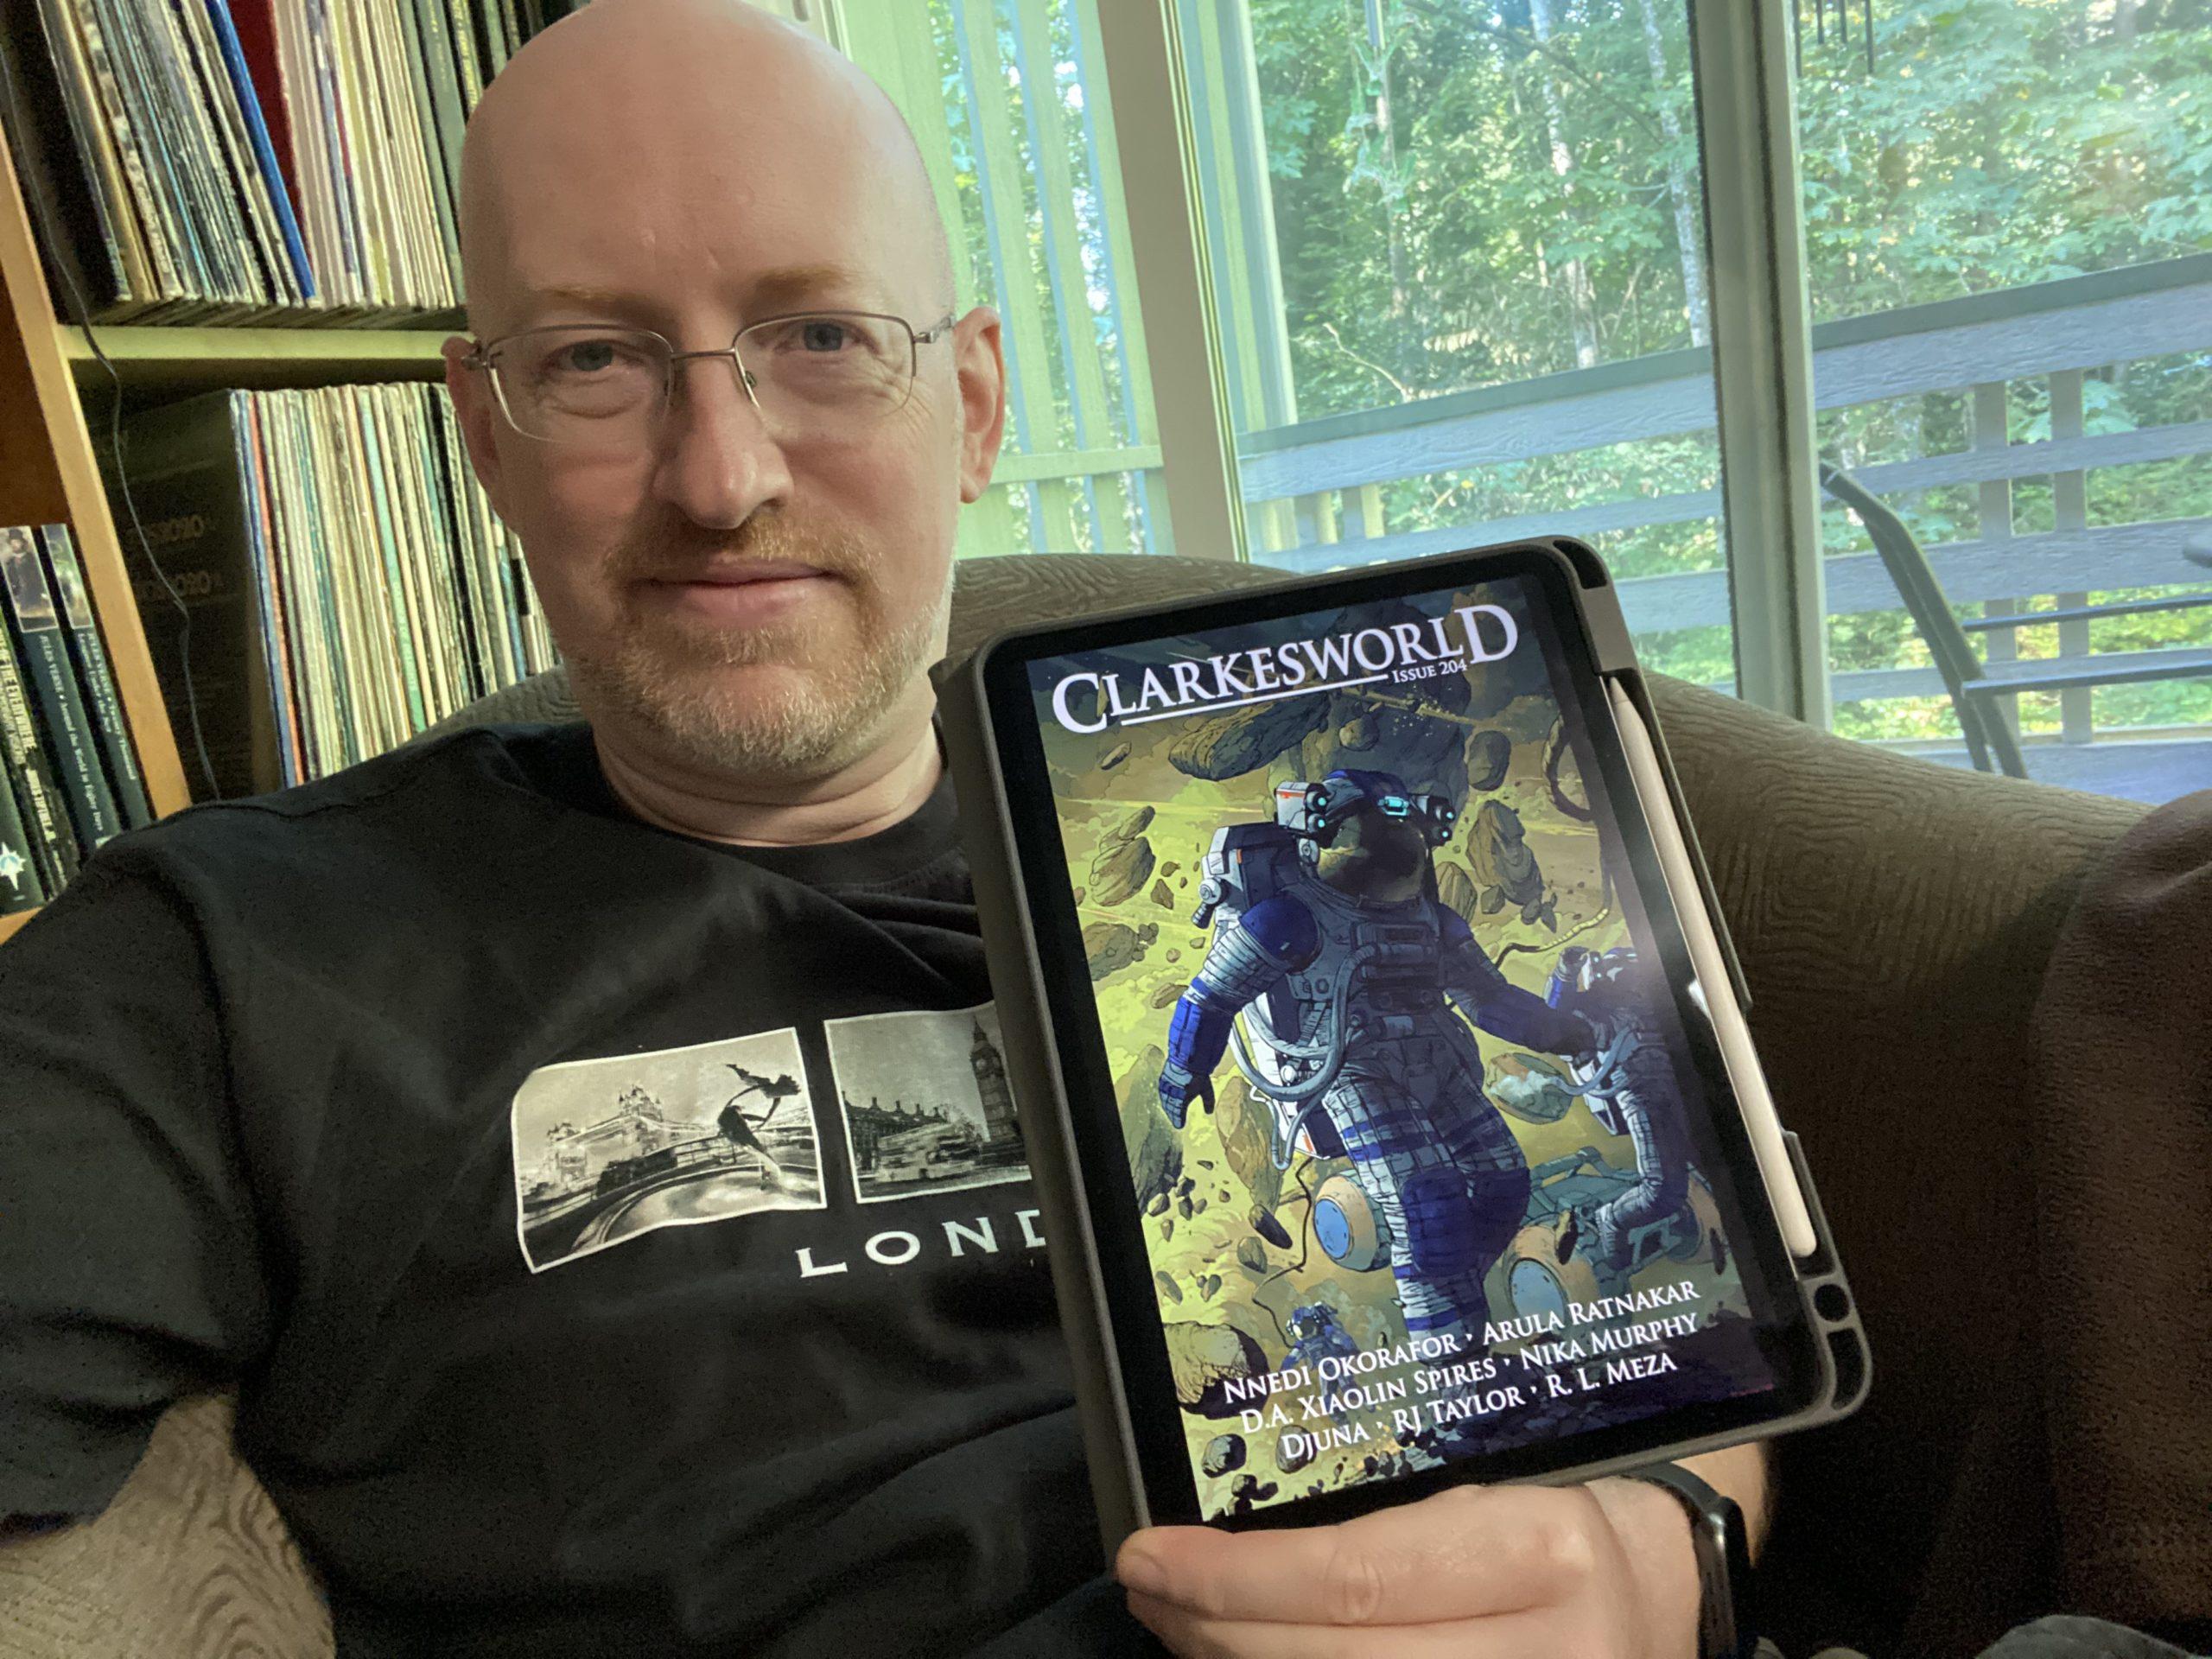 Me holding my iPad showing the cover of Clarkesworld 204